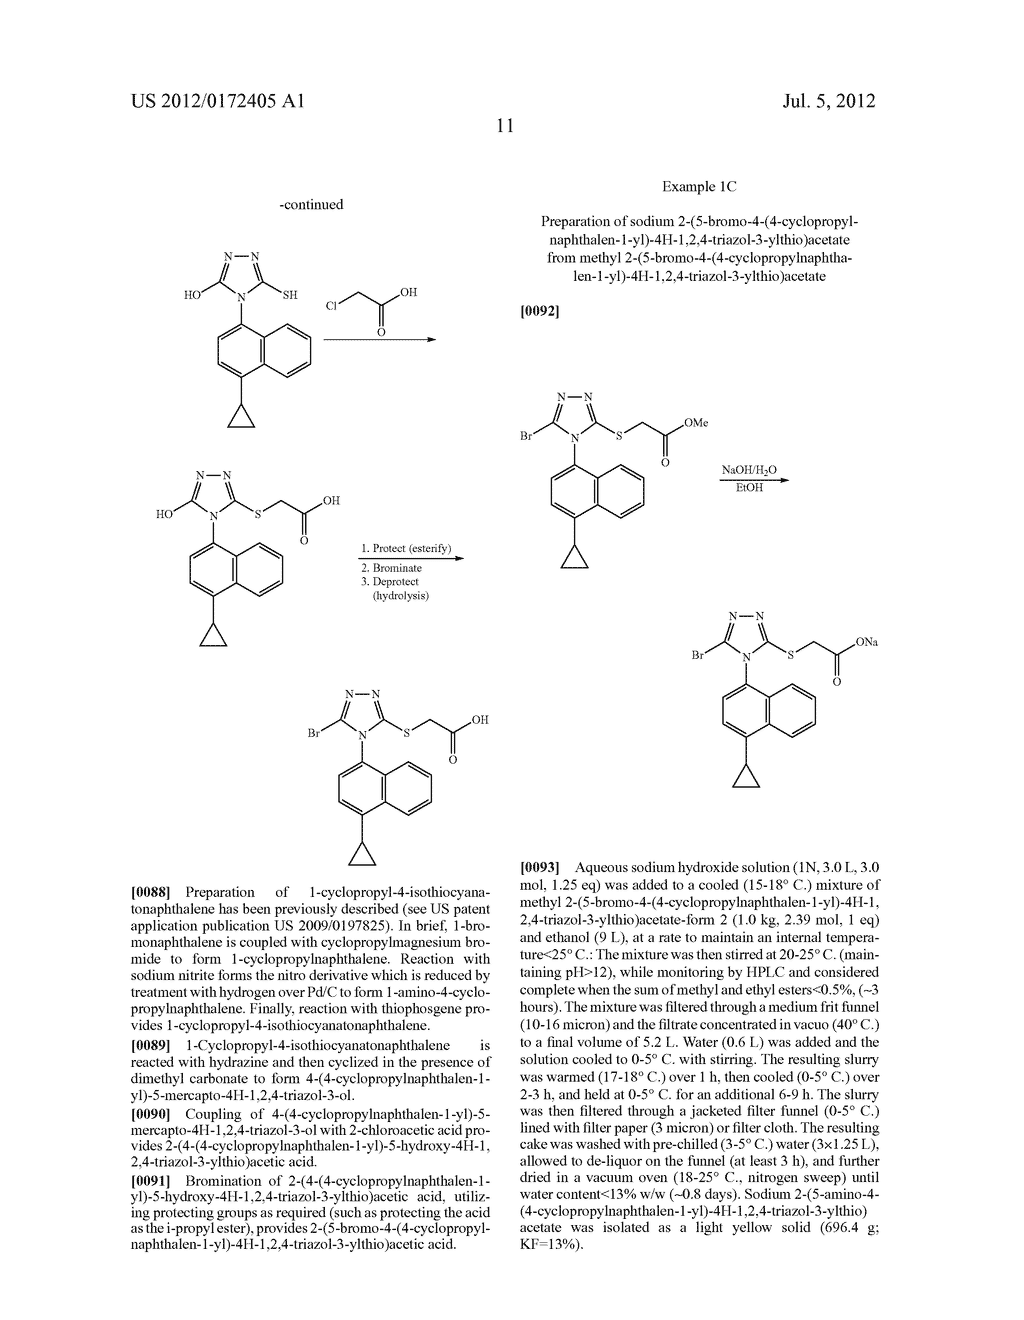 POLYMORPHIC FORMS OF     2-(5-BROMO-4-(4-CYCLOPROPYLNAPHTHALEN-1-YL)-4H-1,2,4-TRIAZOL-3-YLTHIO)ACE-    TIC ACID AND USES THEREOF - diagram, schematic, and image 24